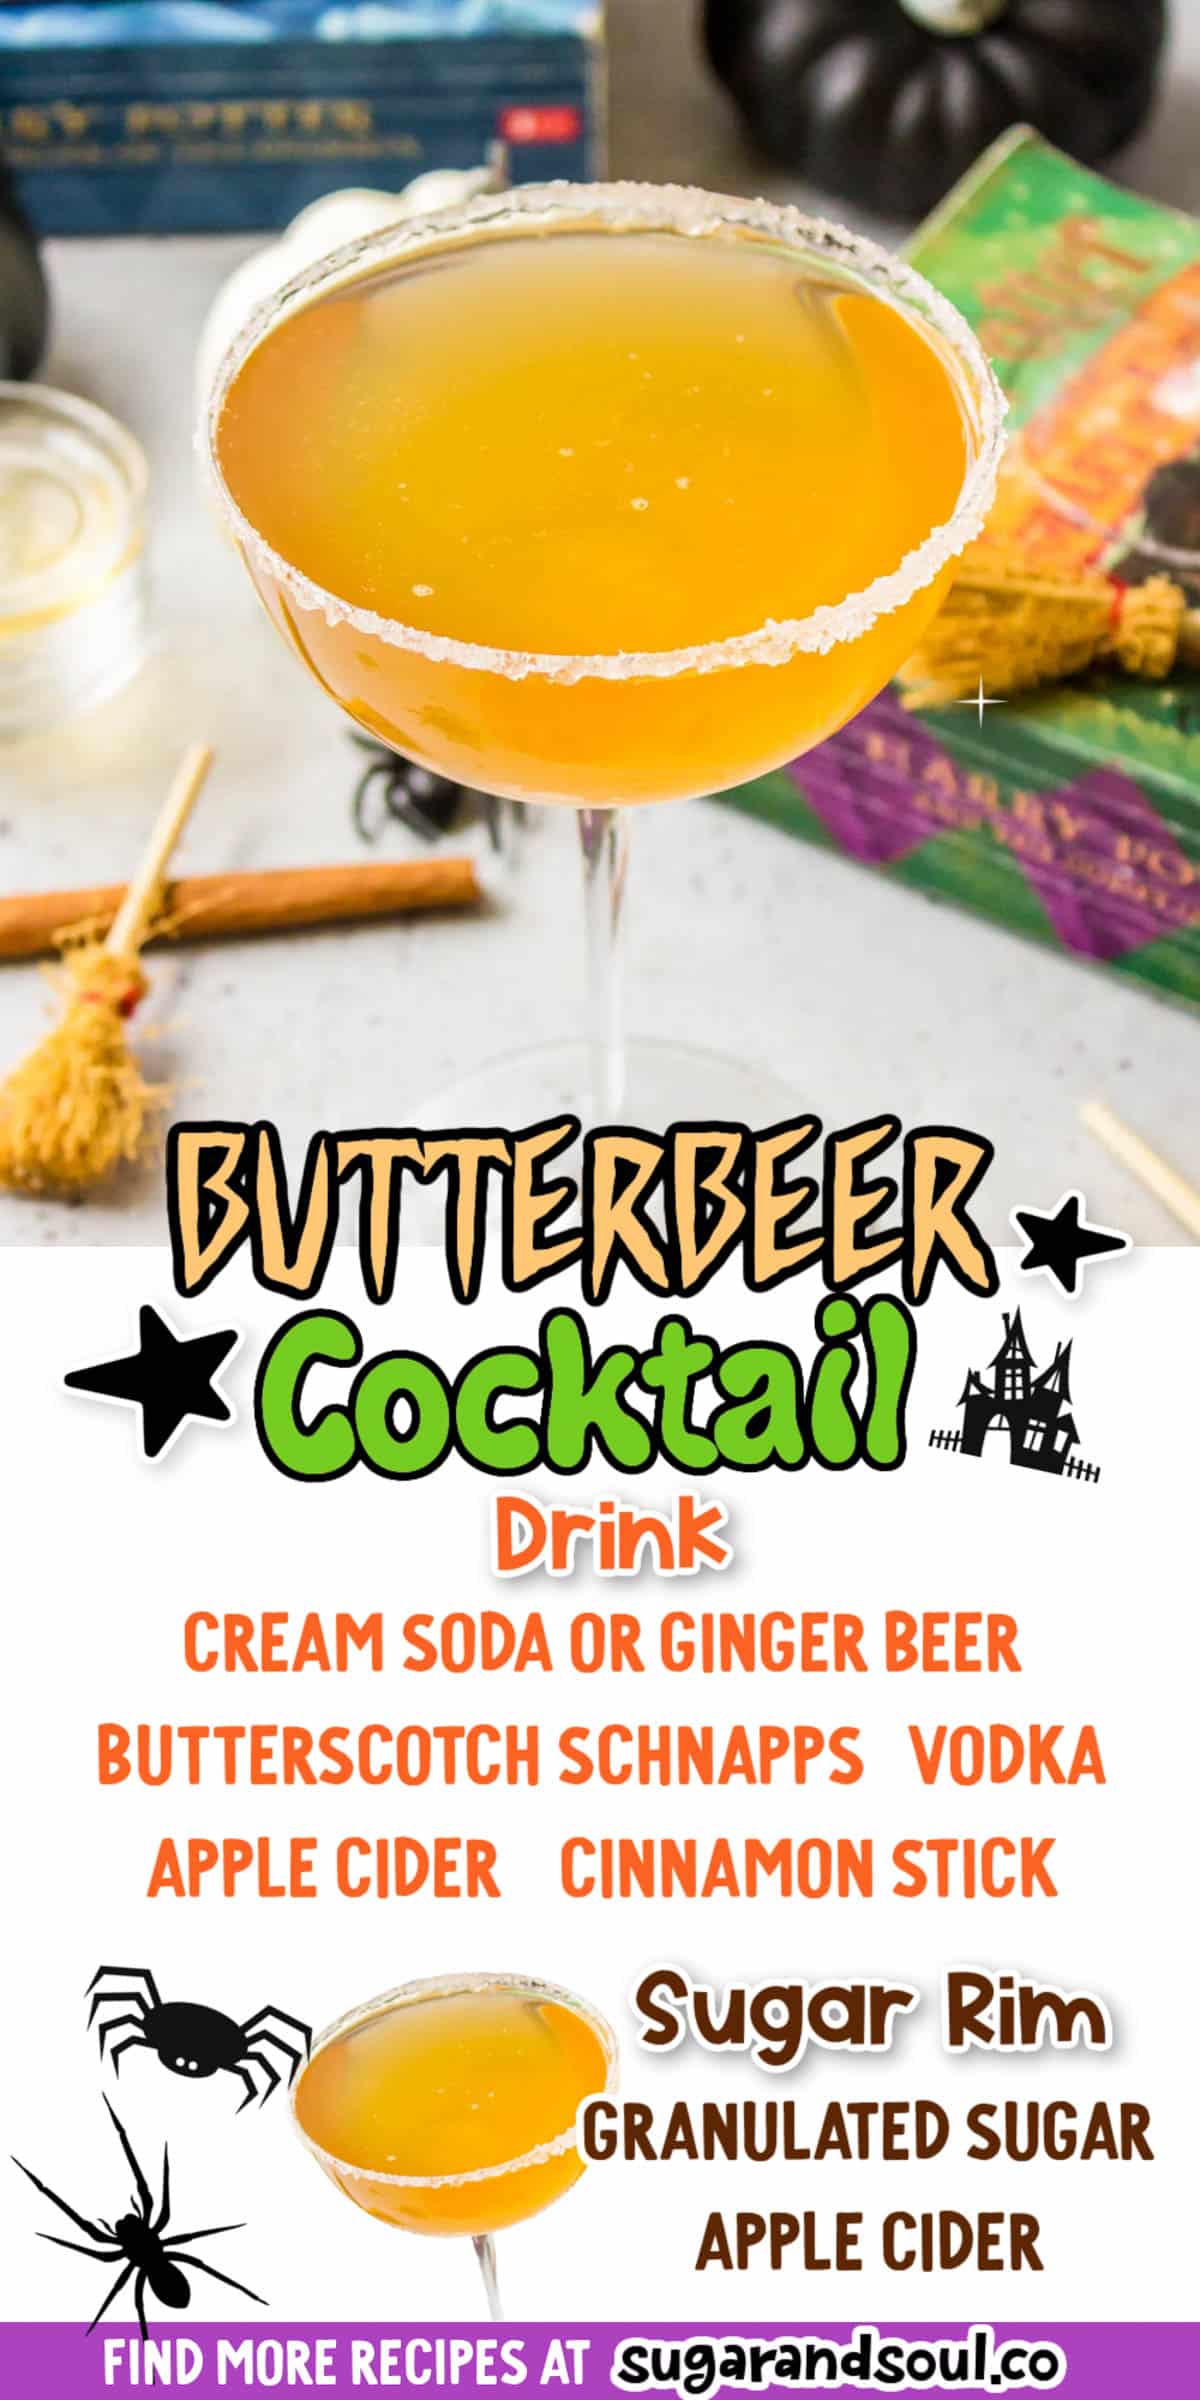 This Butterbeer Cocktail is a 4-ingredient drink that's a fun, tasty twist on the iconic Butterbeer that every Harry Potter fan knows and loves! Made with apple cider, cream soda, butterscotch schnapps, and vodka. via @sugarandsoulco